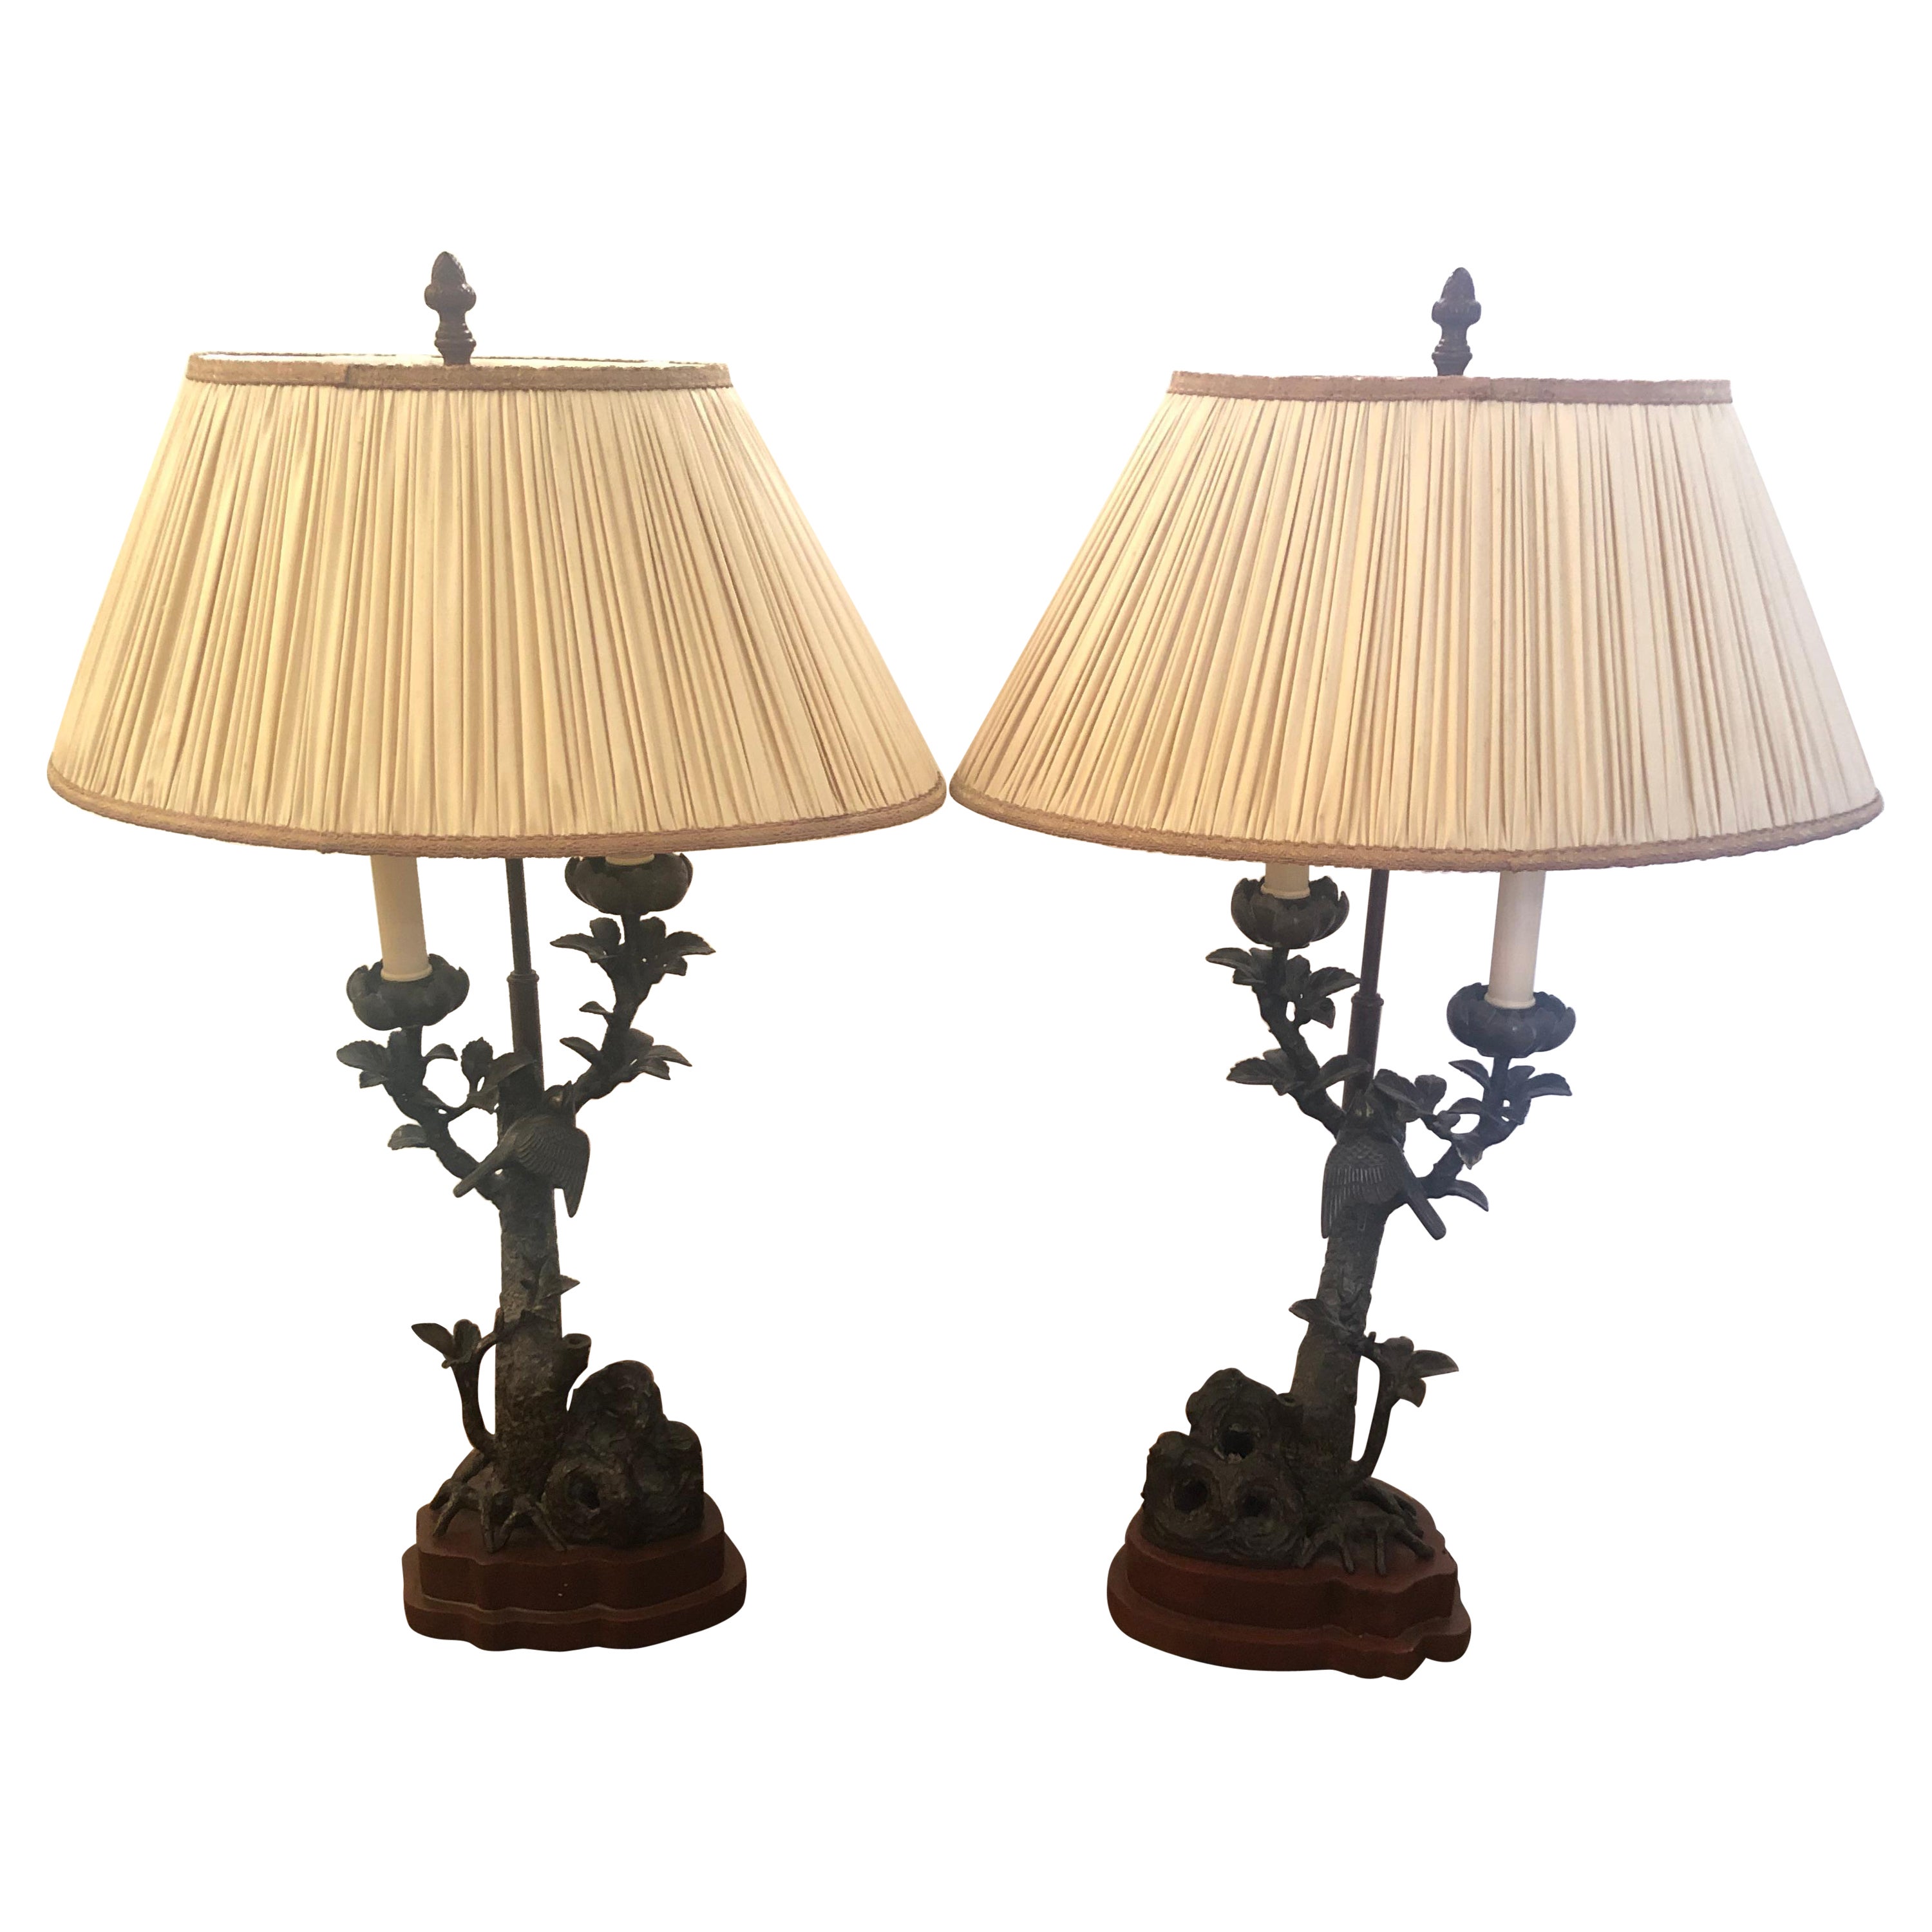 Pair of Rich Elegant Bronze Faux Bois Table Lamps with Birds and Foliage